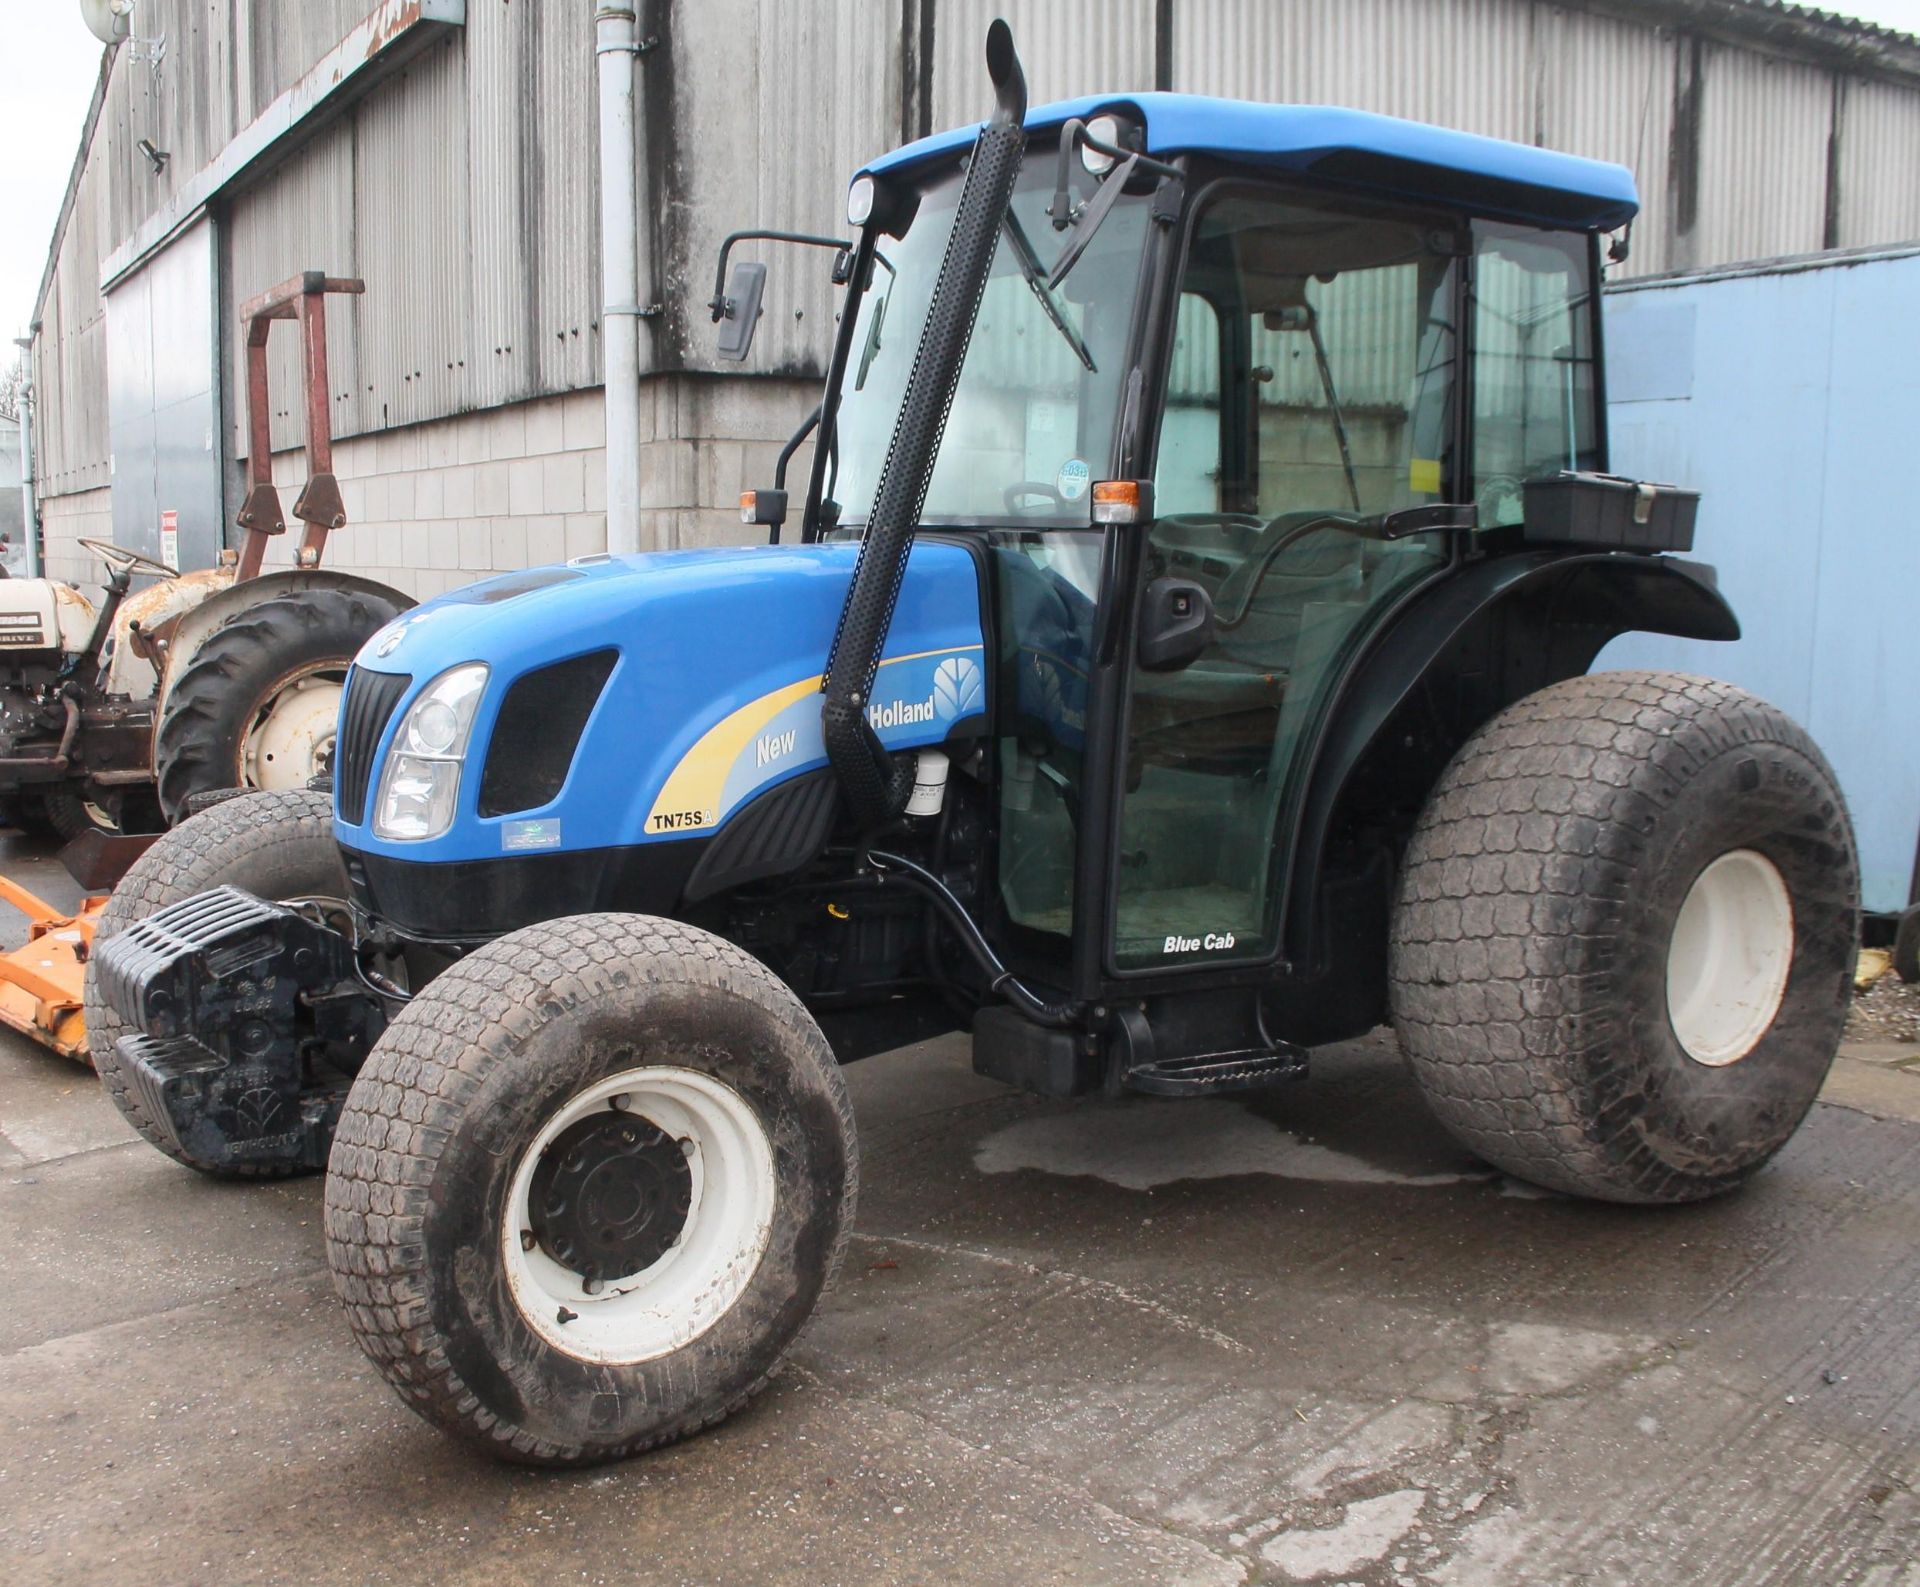 NEW HOLLAND TN75 TRACTOR HX05JEJ FIRST REG 01/04/05 1045 HOURS ONE OWNER FROM NEW NO VAT